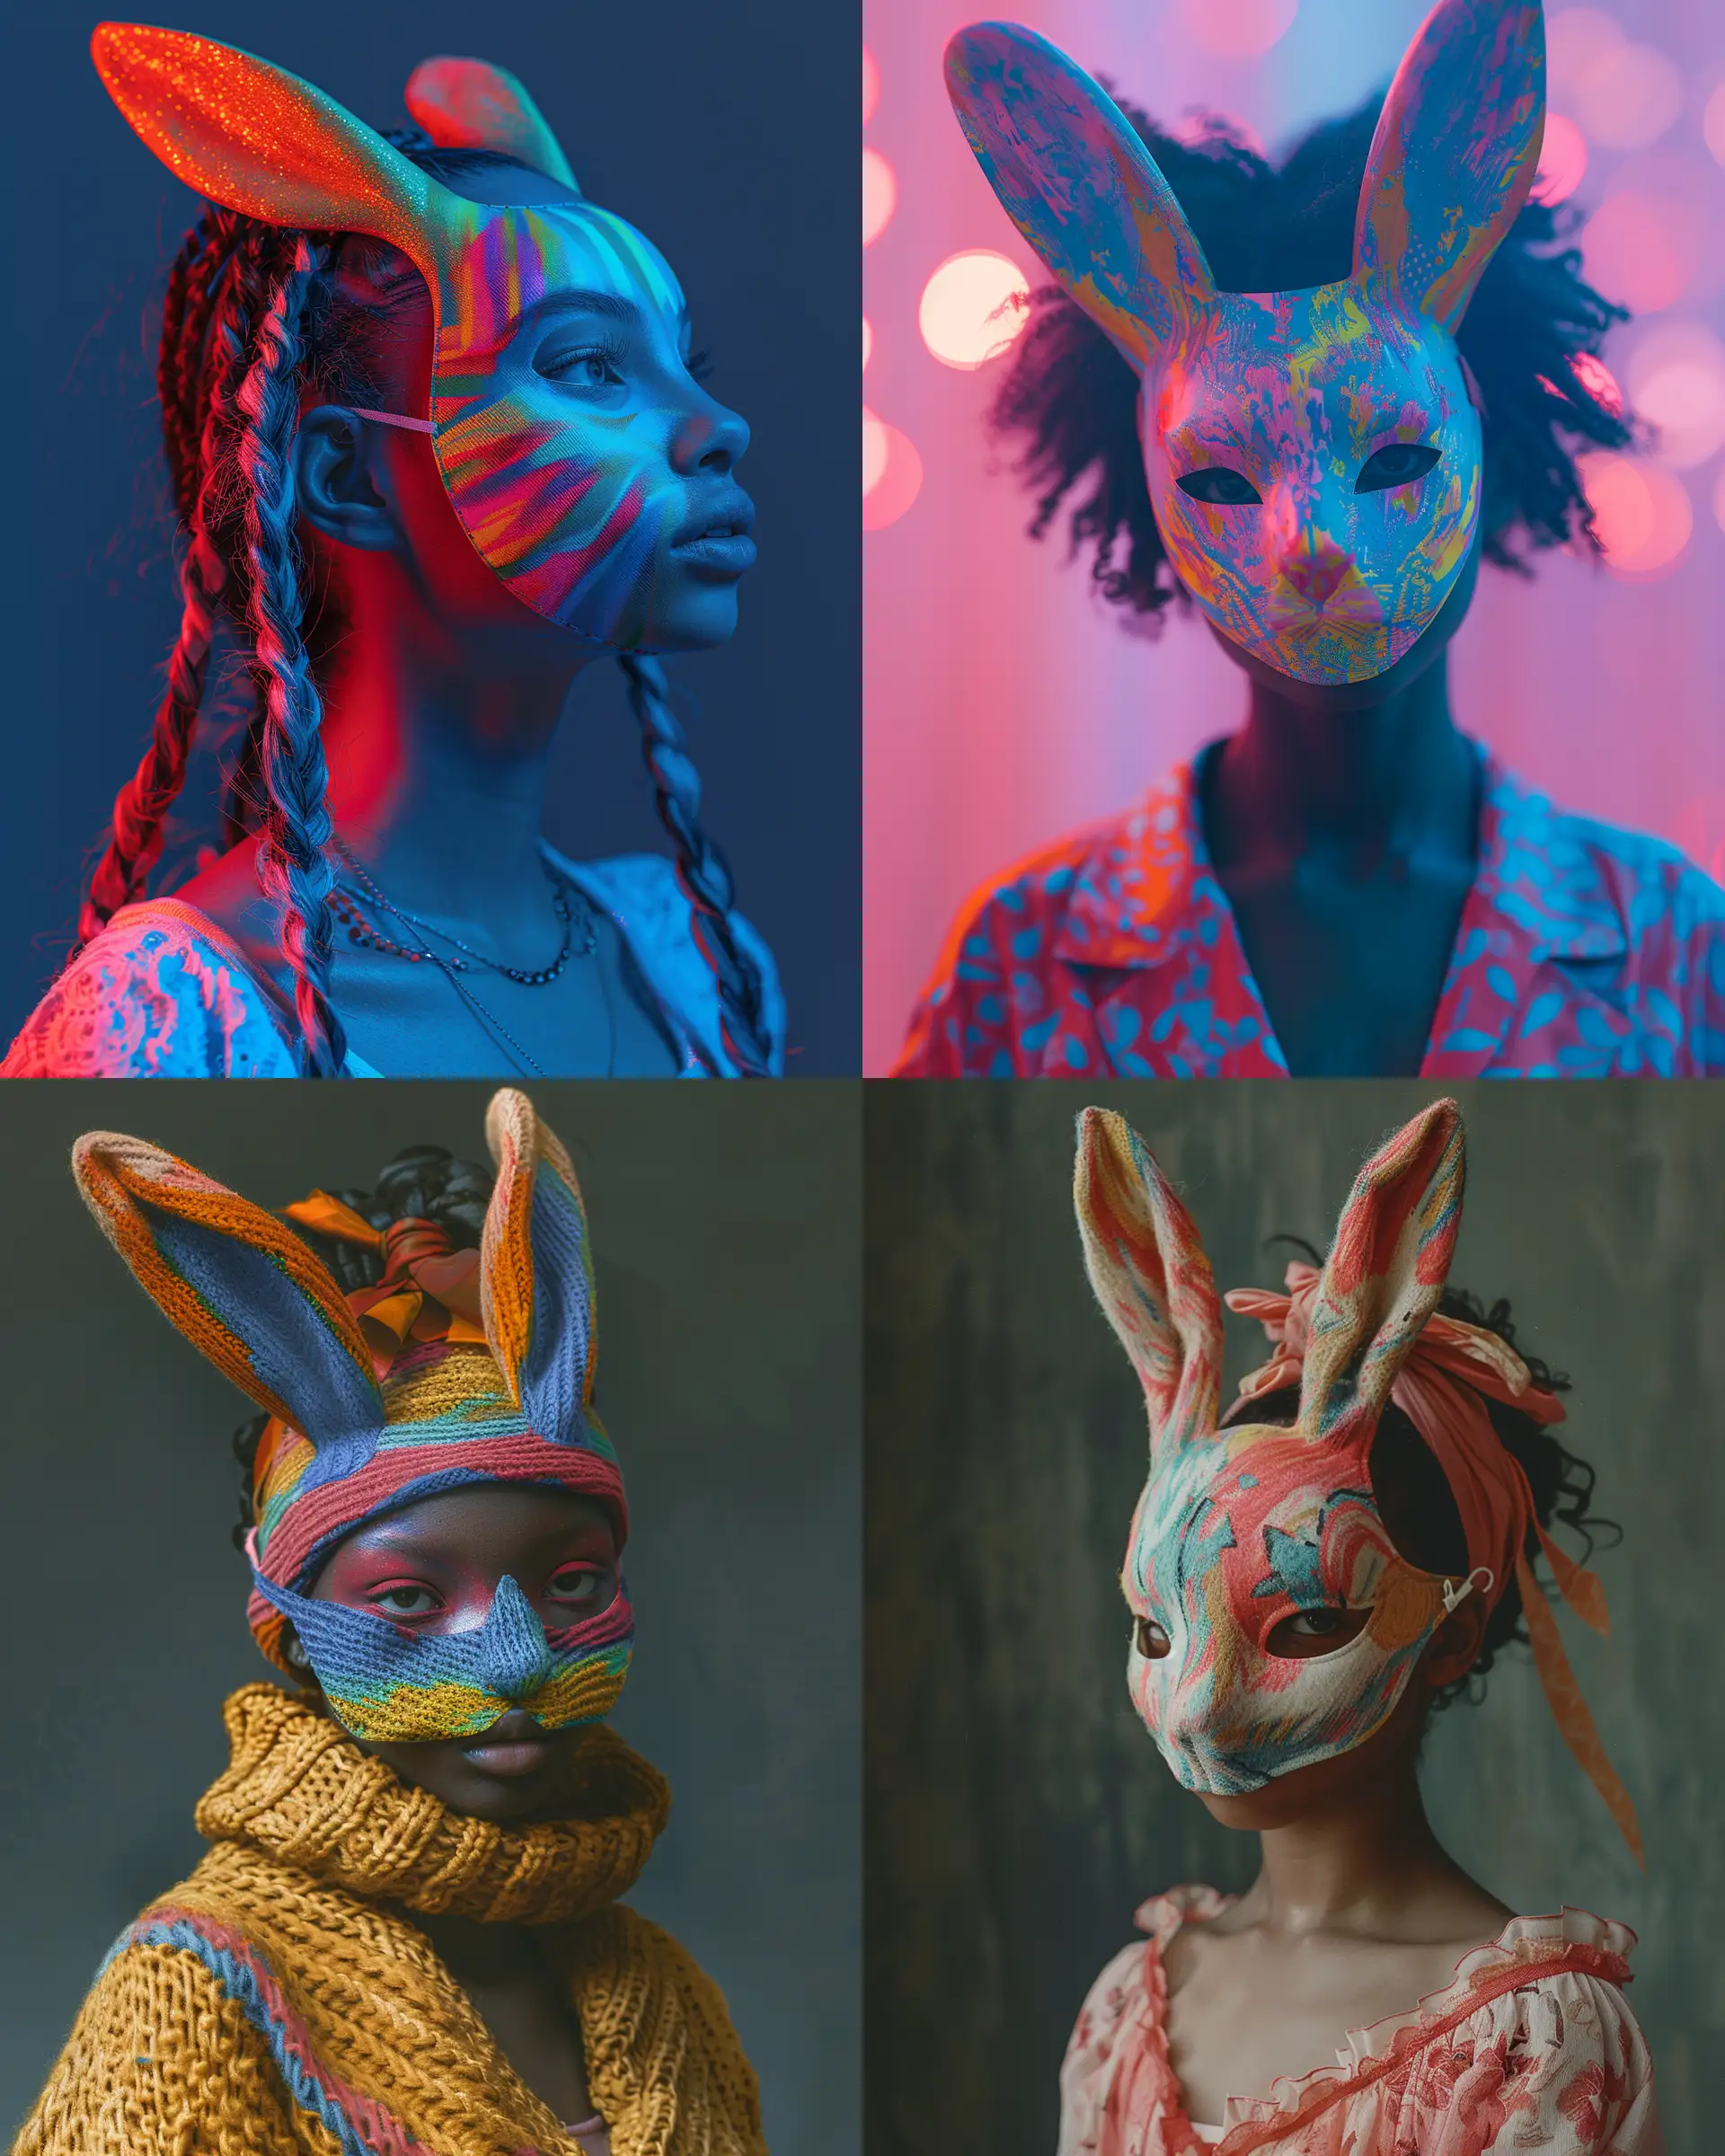 Mysterious-Girl-in-Colorful-Rabbit-Mask-Moody-NeoNoir-Portrait-Inspired-by-Alastair-Magnaldo-David-Choe-and-Kehinde-Wiley